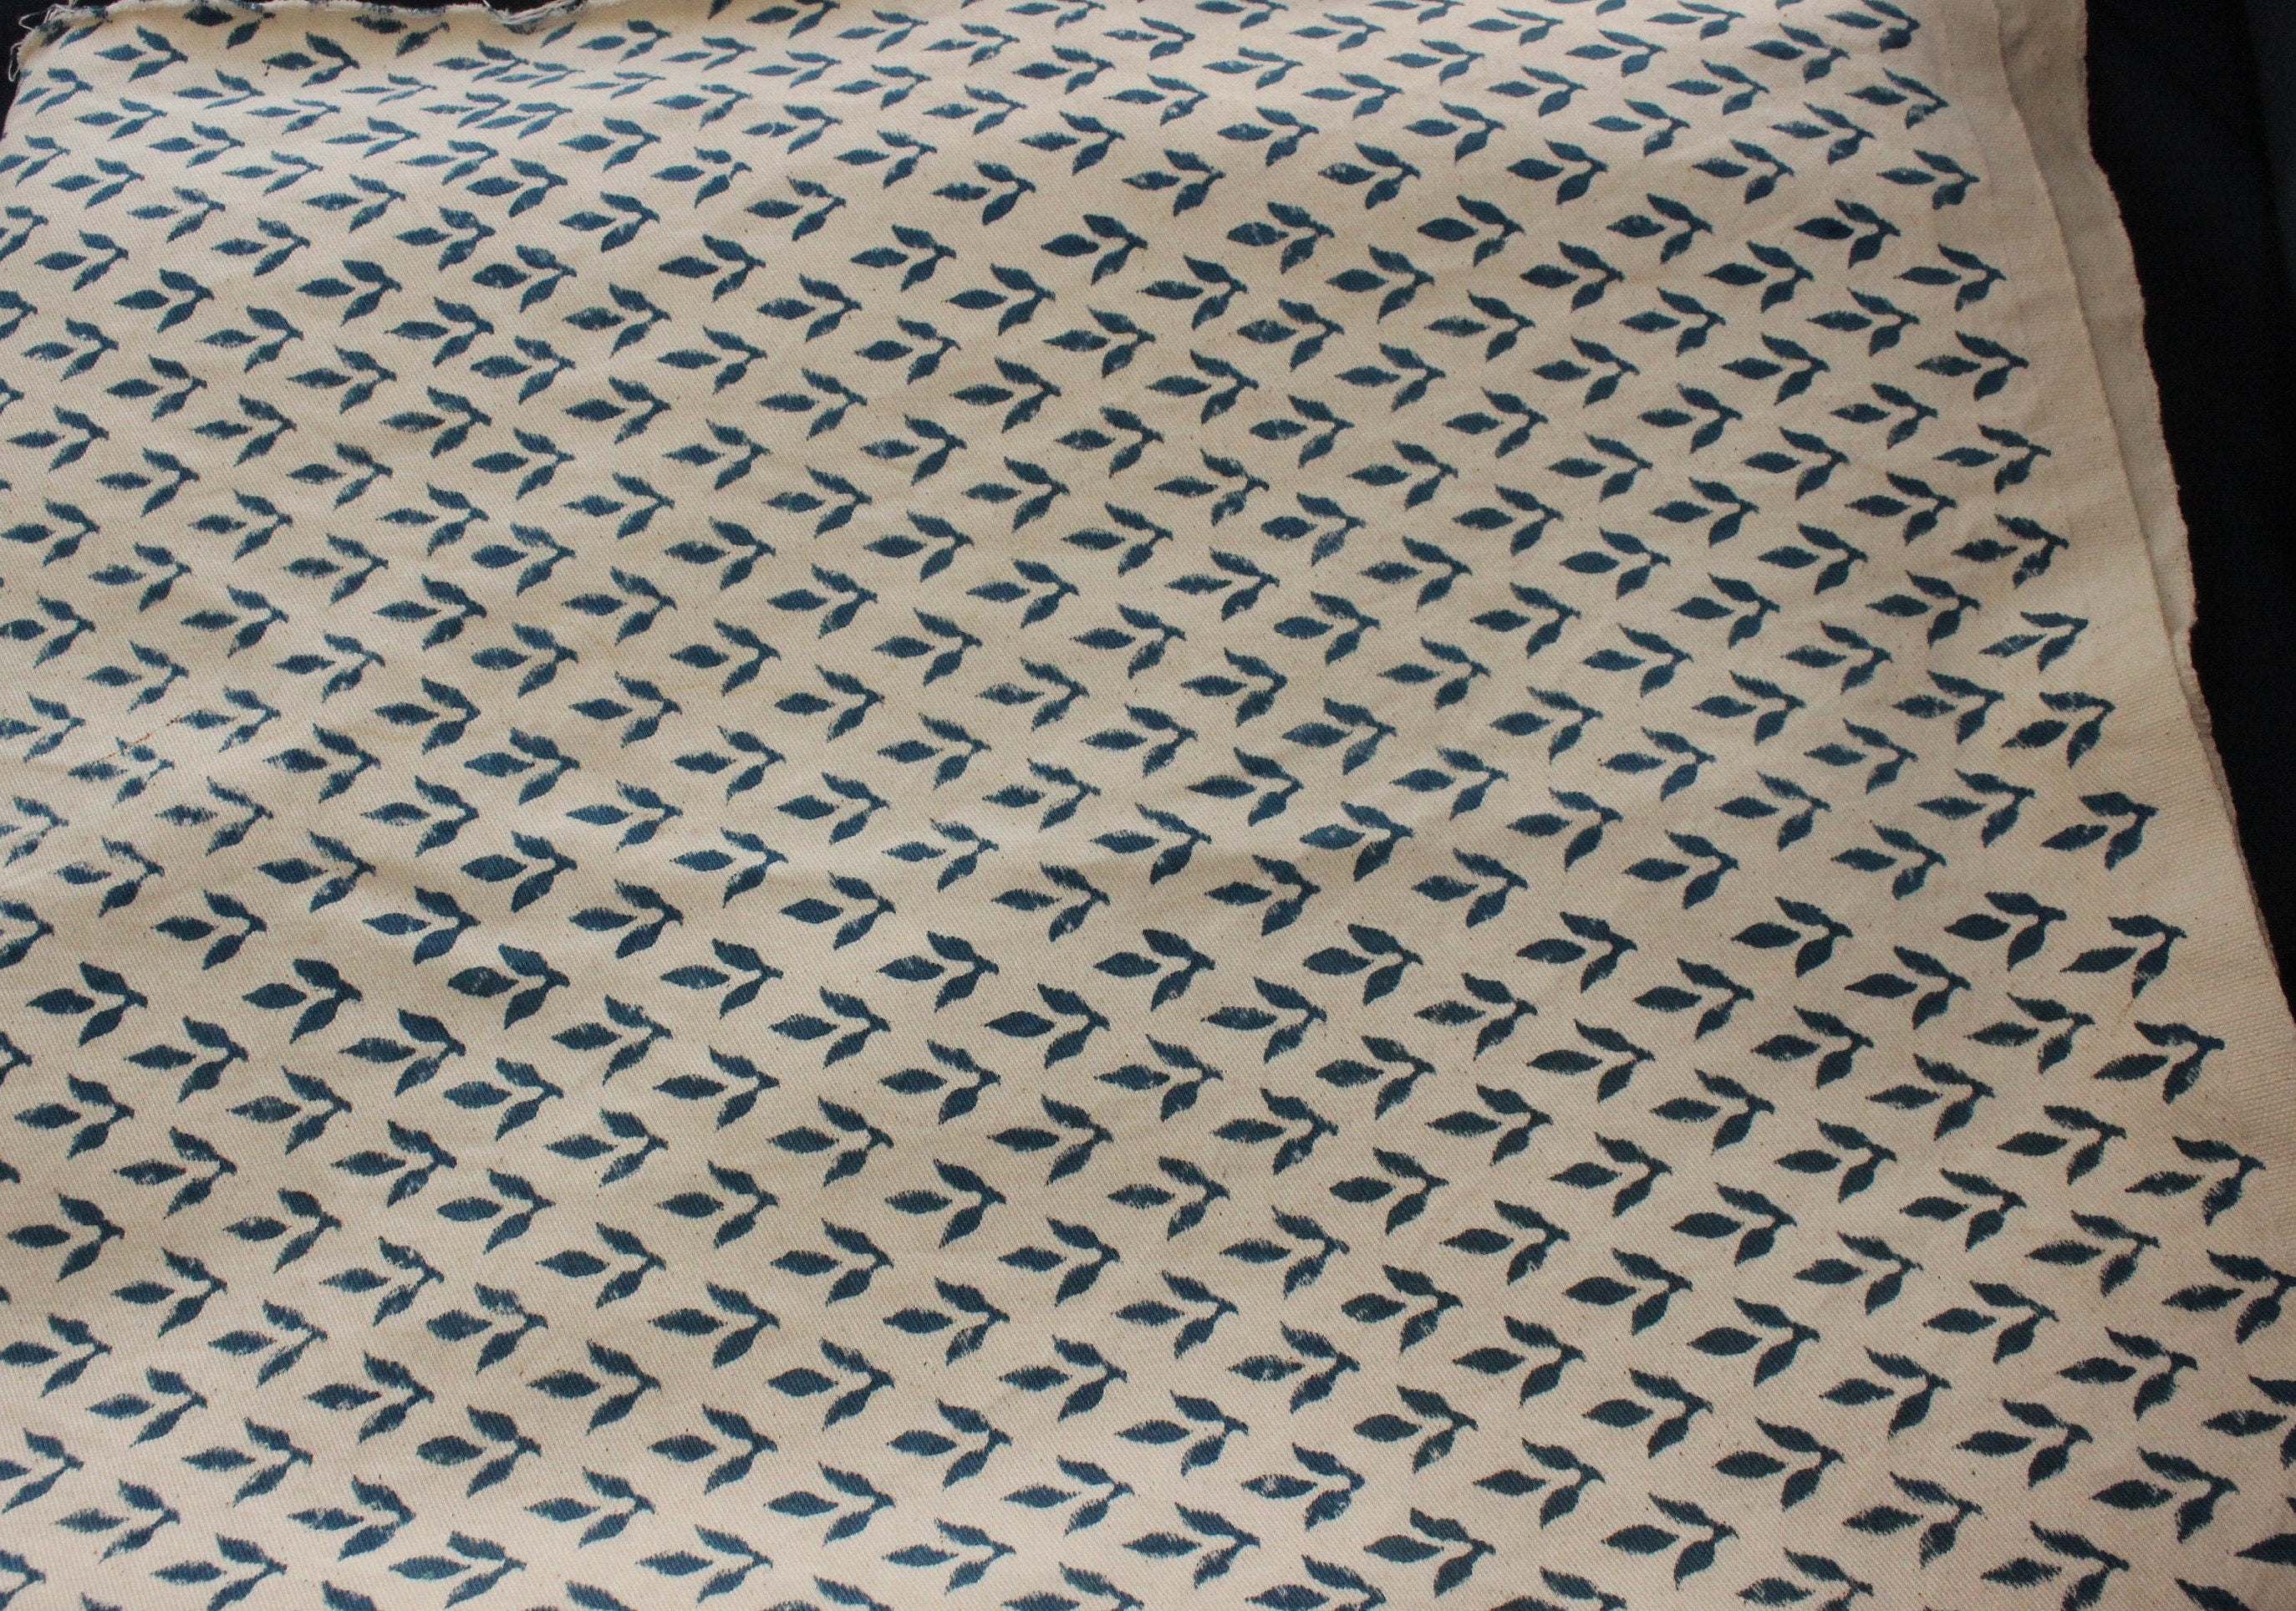 Diya Bati  Beige Blue Block Print Fabric, Indian Linen Fabric, Buy Fabric By The Yard Handmade Upholstery Fabric Linen For Chair And Sofa